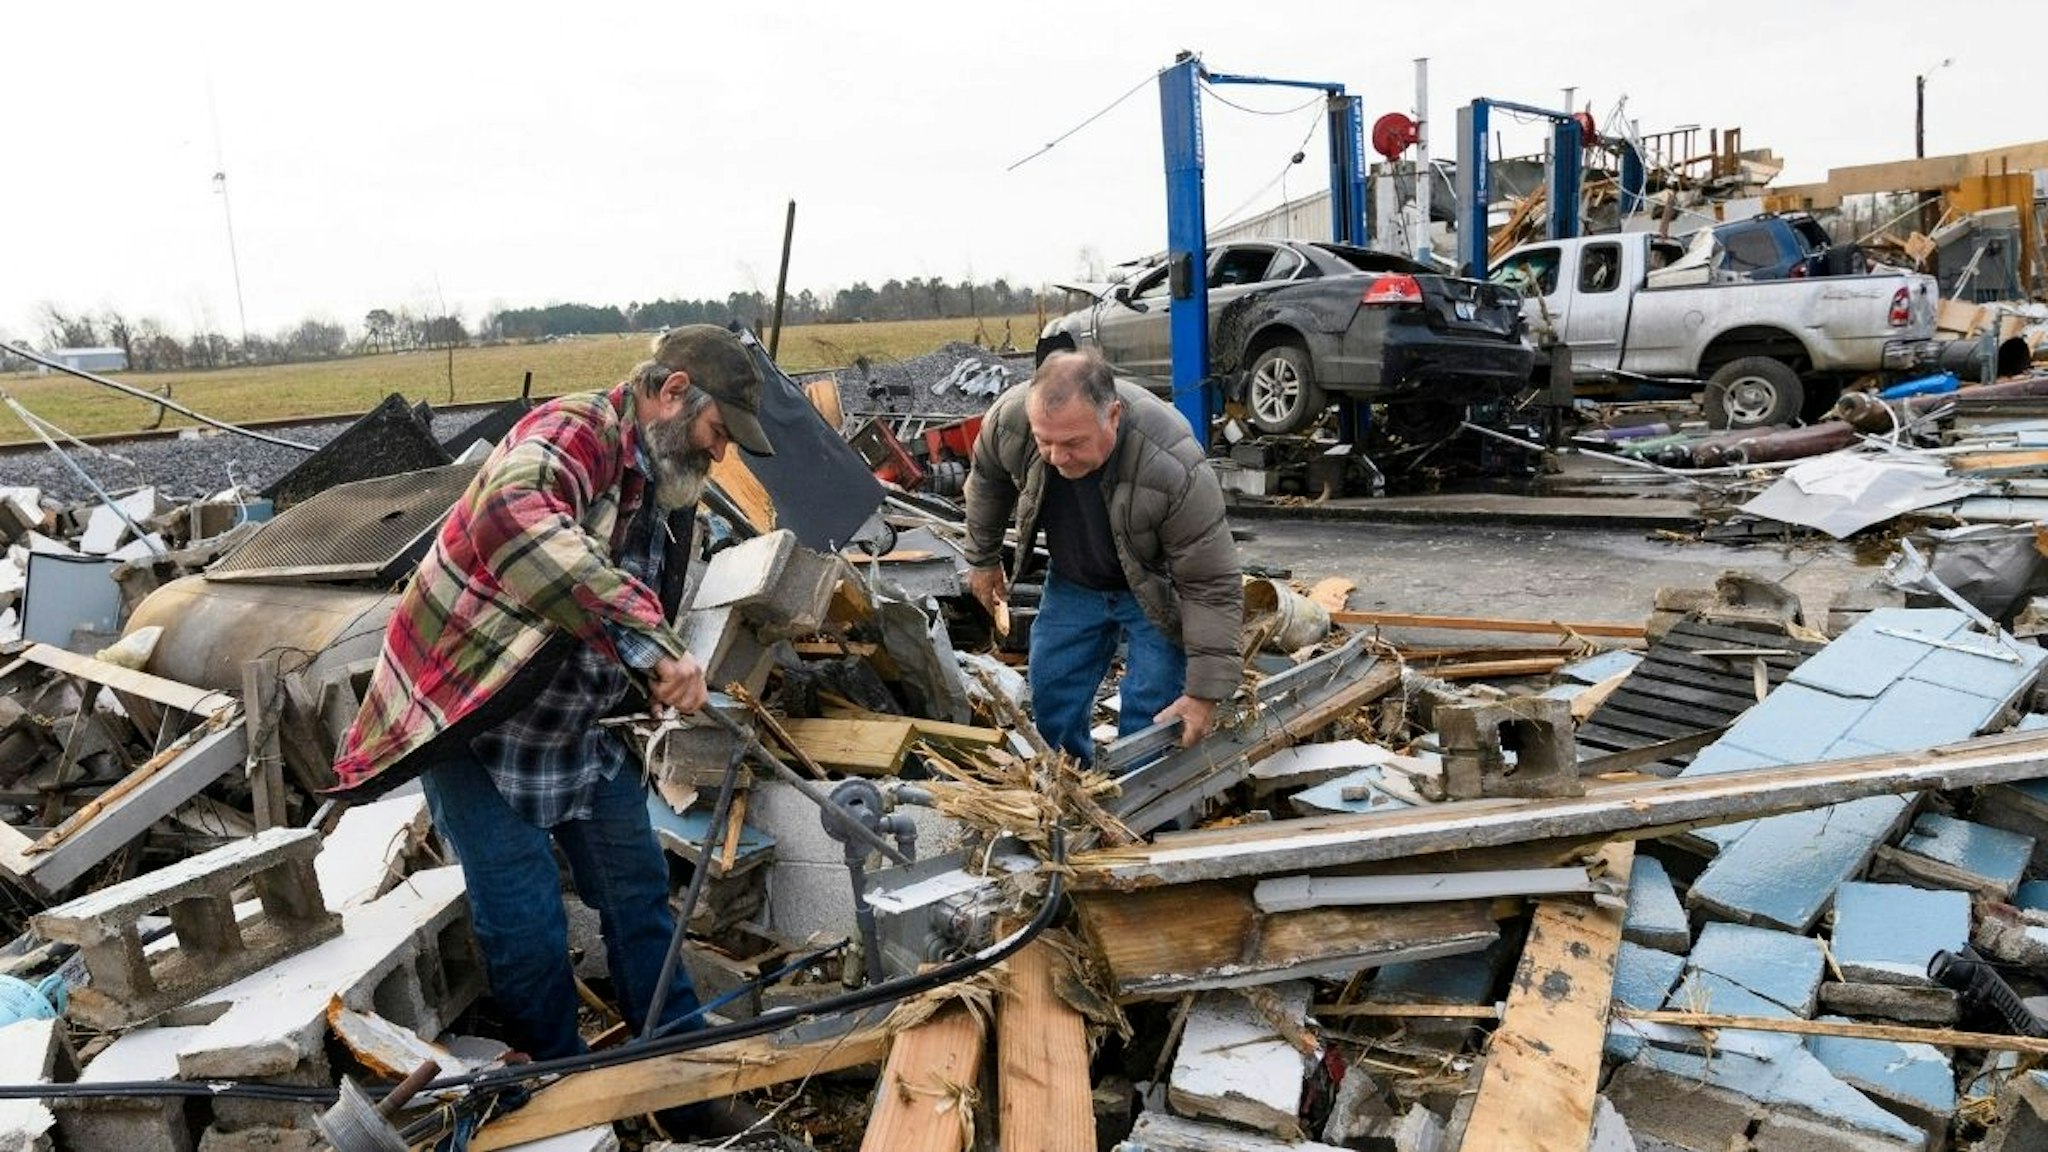 Martin Bolton (L) and shop owner Danny Wagner try to shut off a leaking gas meter after his automobile repair shop was destroyed by a tornado in Mayfield, Kentucky, on December 11, 2021.